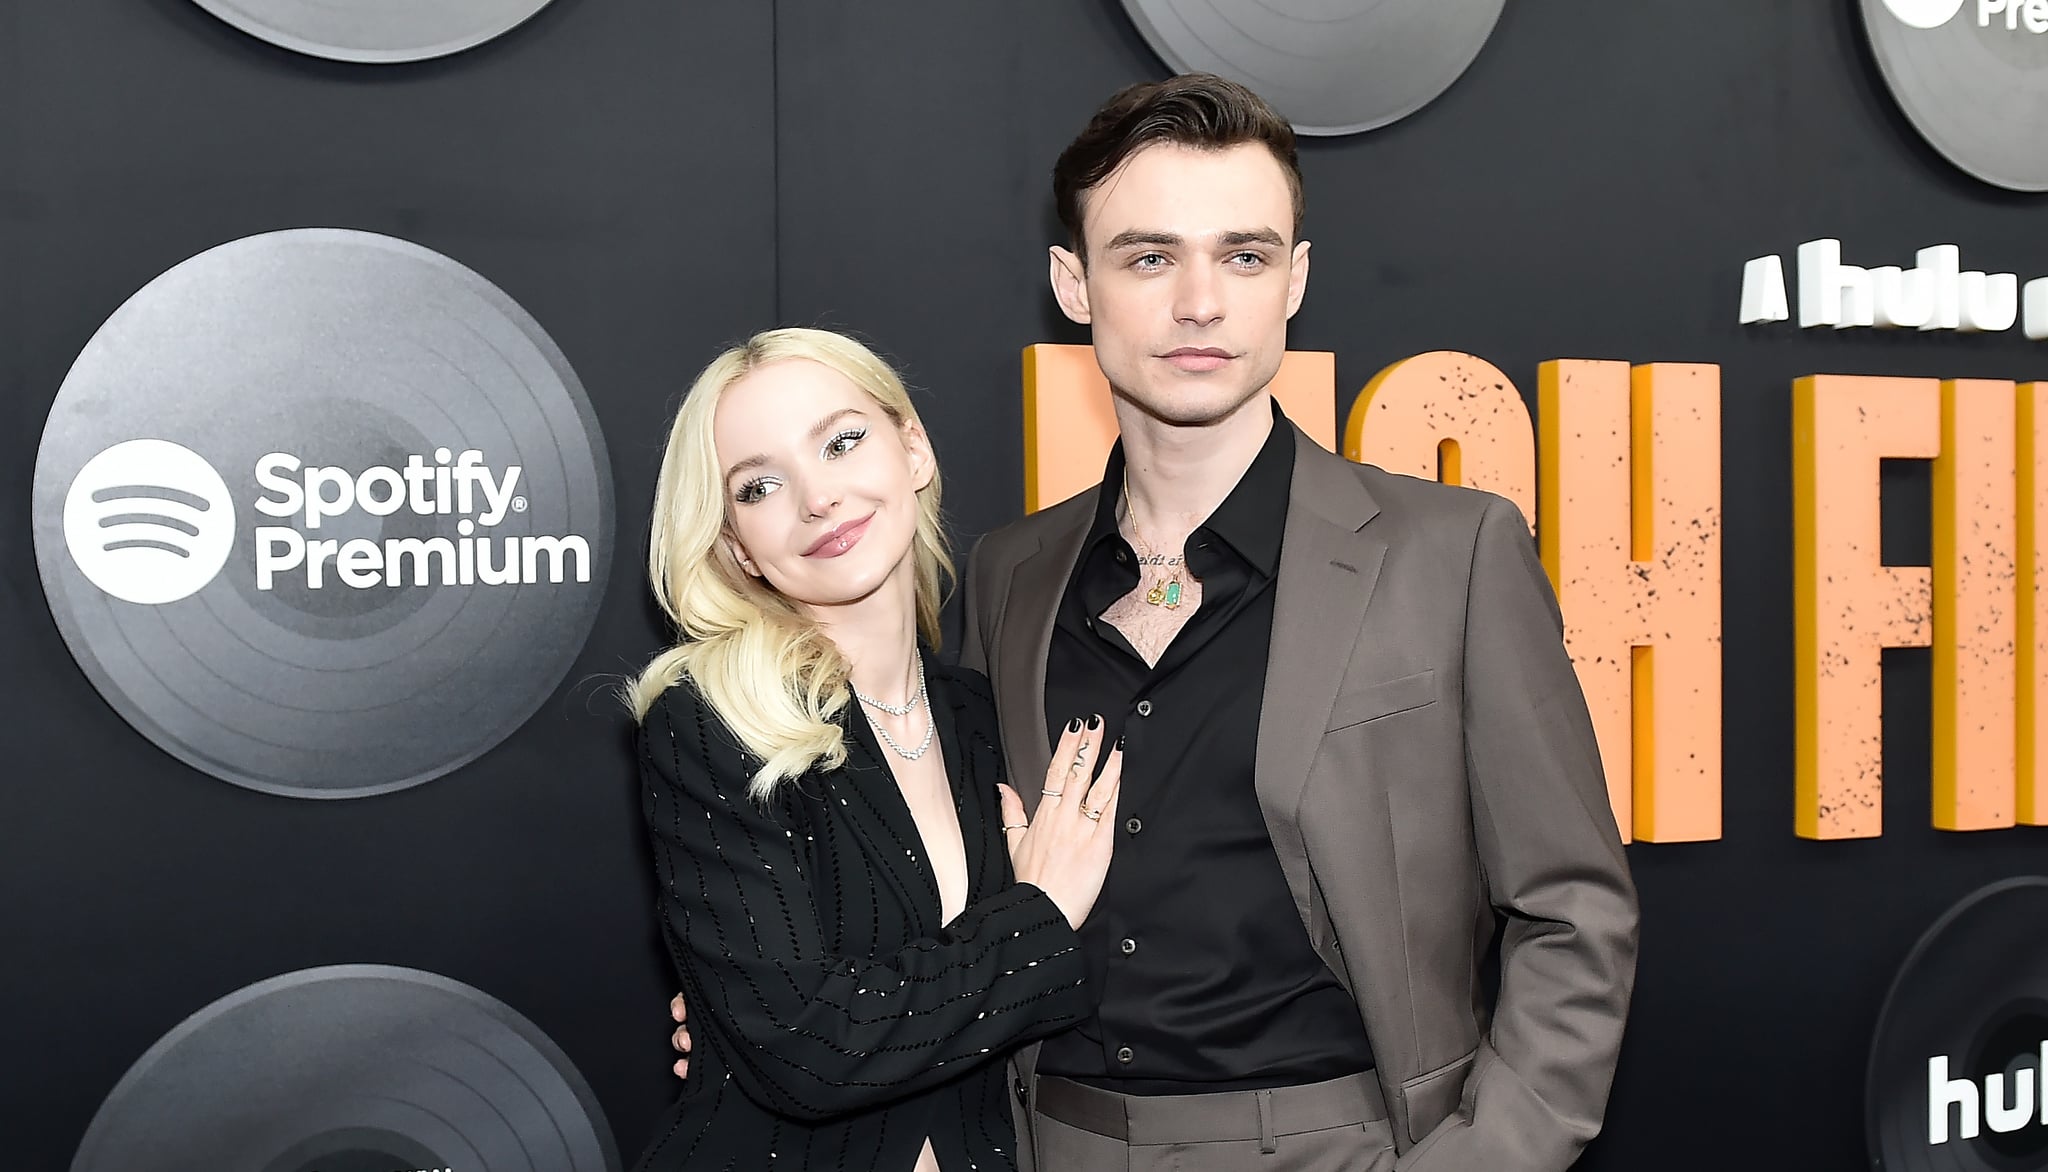 NEW YORK, NEW YORK - FEBRUARY 13: Dove Cameron and Thomas Doherty attend Hulu's